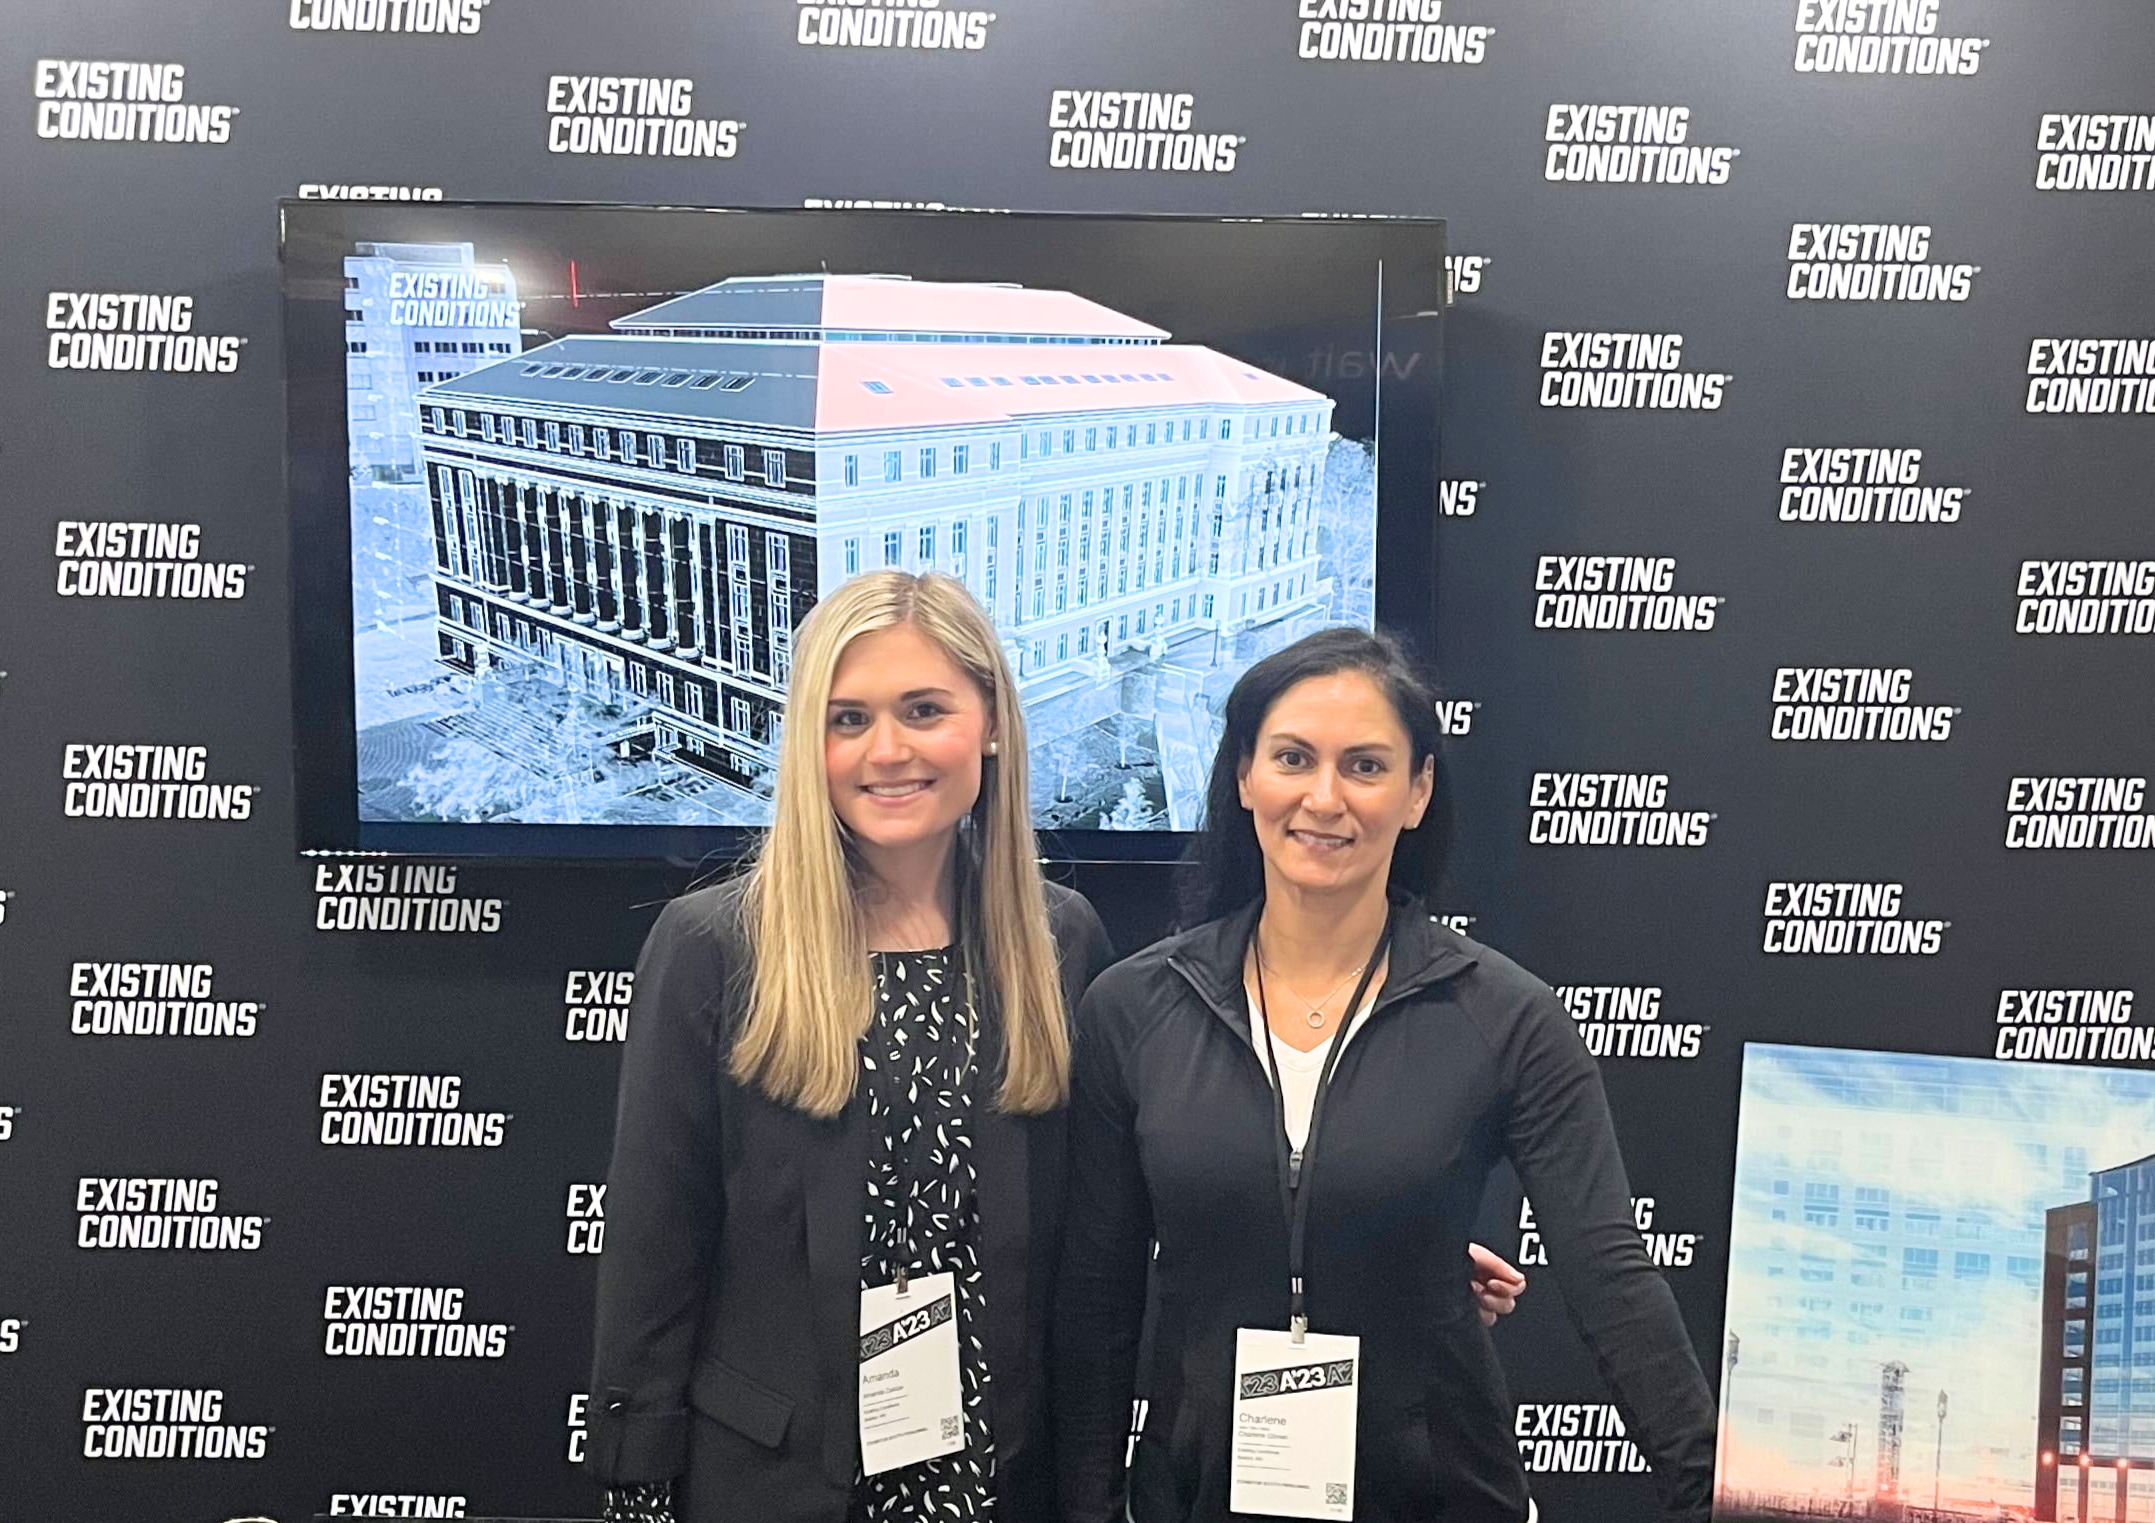 Amanda Zaslow, Marketing and Public Relations Associate (left), and Charlene Gilman, Account Executive (right) showcasing our work at the AIA Conference on Architecture 2023 in San Francisco, CA.